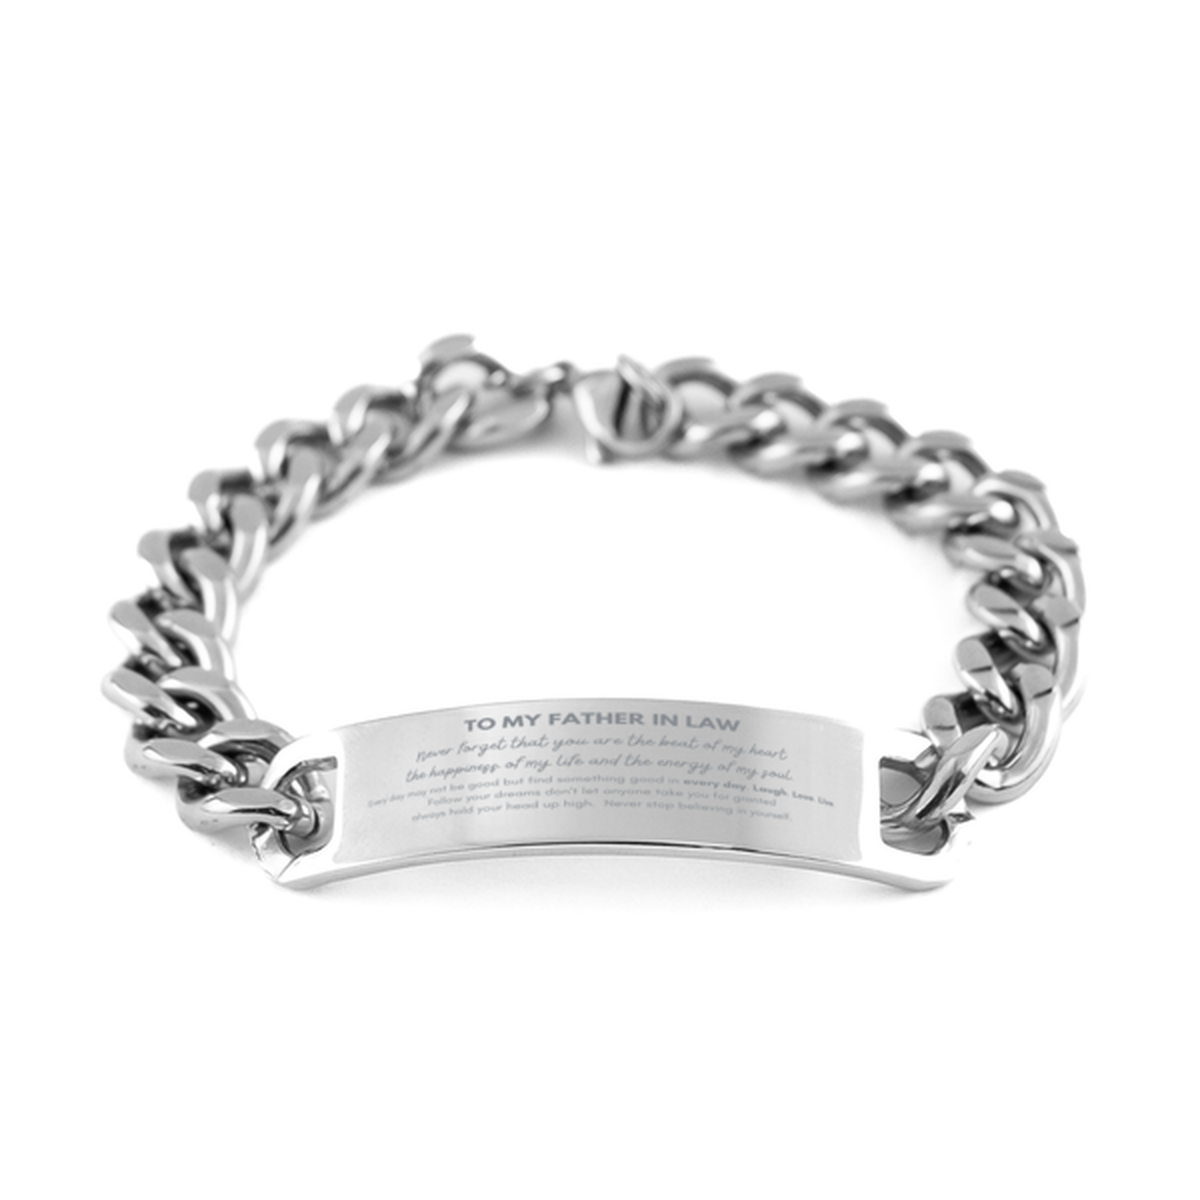 To My Father In Law Bracelet Gifts, Christmas Father In Law Cuban Chain Stainless Steel Bracelet Present, Birthday Unique Motivational For Father In Law, To My Father In Law Never forget that you are the beat of my heart the happiness of my life and the e